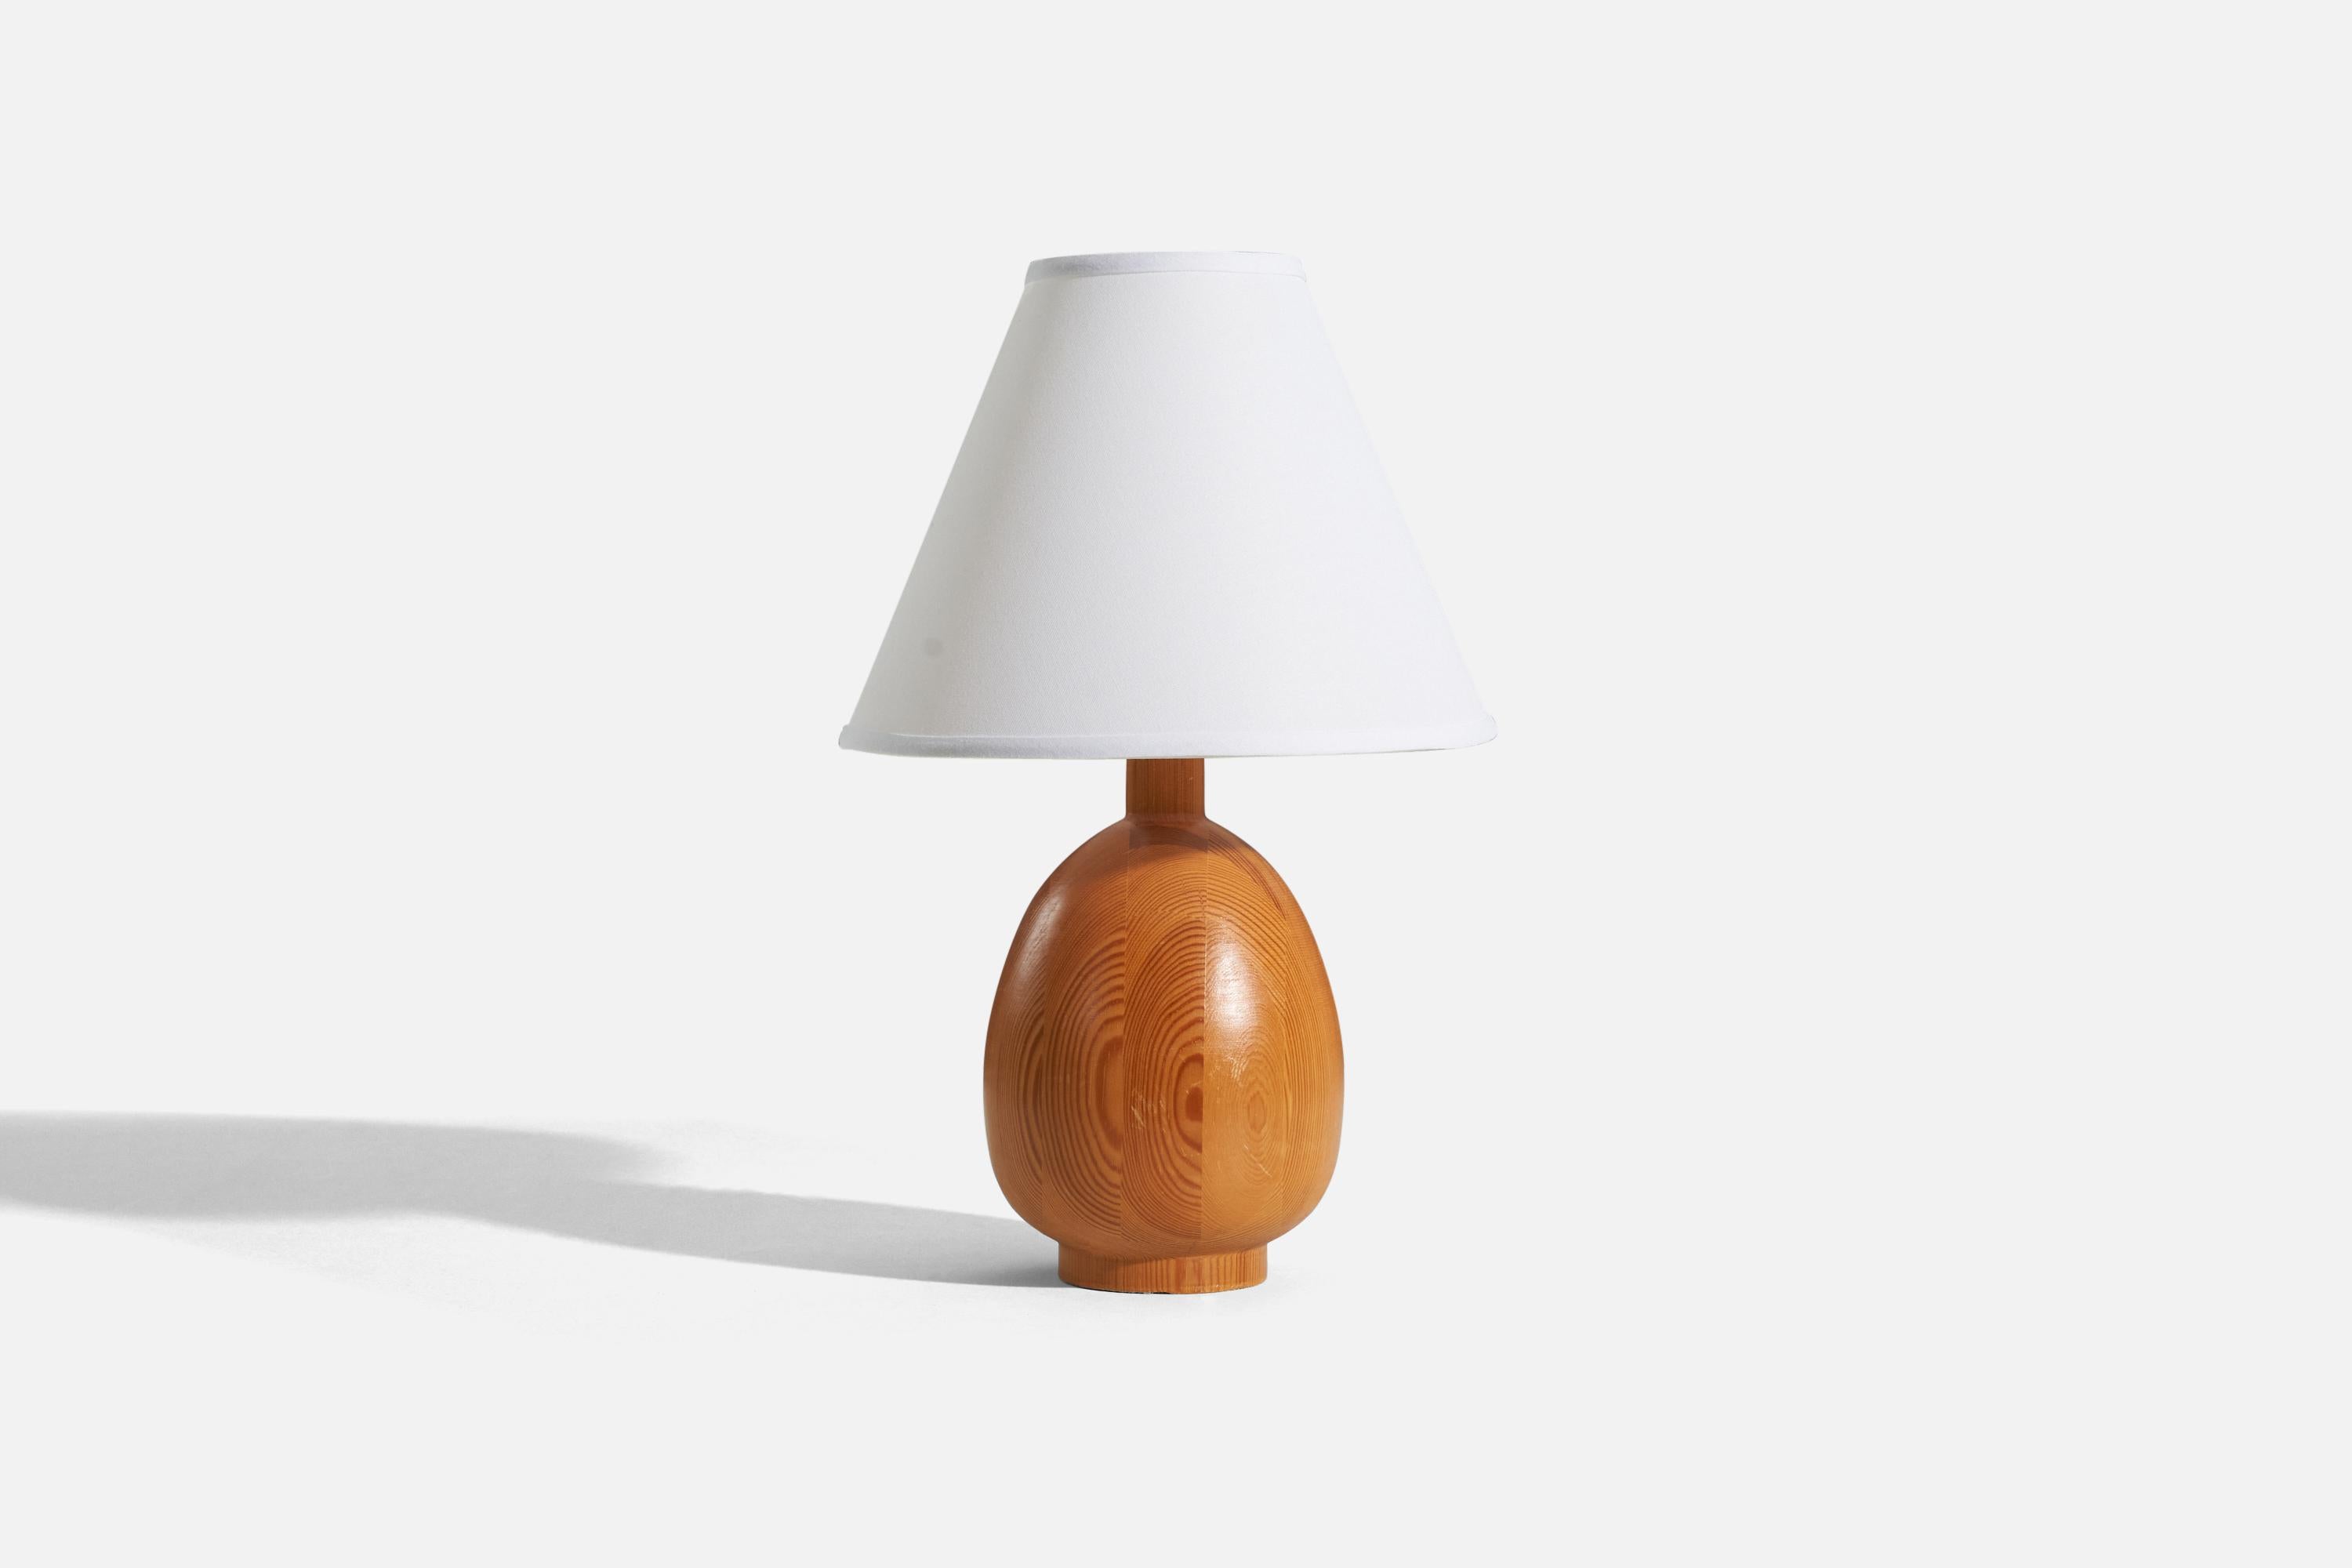 A solid pine table lamp designed and produced by Markslöjd, Kinna, Sweden, c. 1970s.

Sold without lampshade. 
Dimensions of lamp (inches) : 11.625 x 5.375 x 5.375 (H x W x D)
Dimensions of shade (inches) : 4 x 10 x 8 (T x B x H)
Dimension of